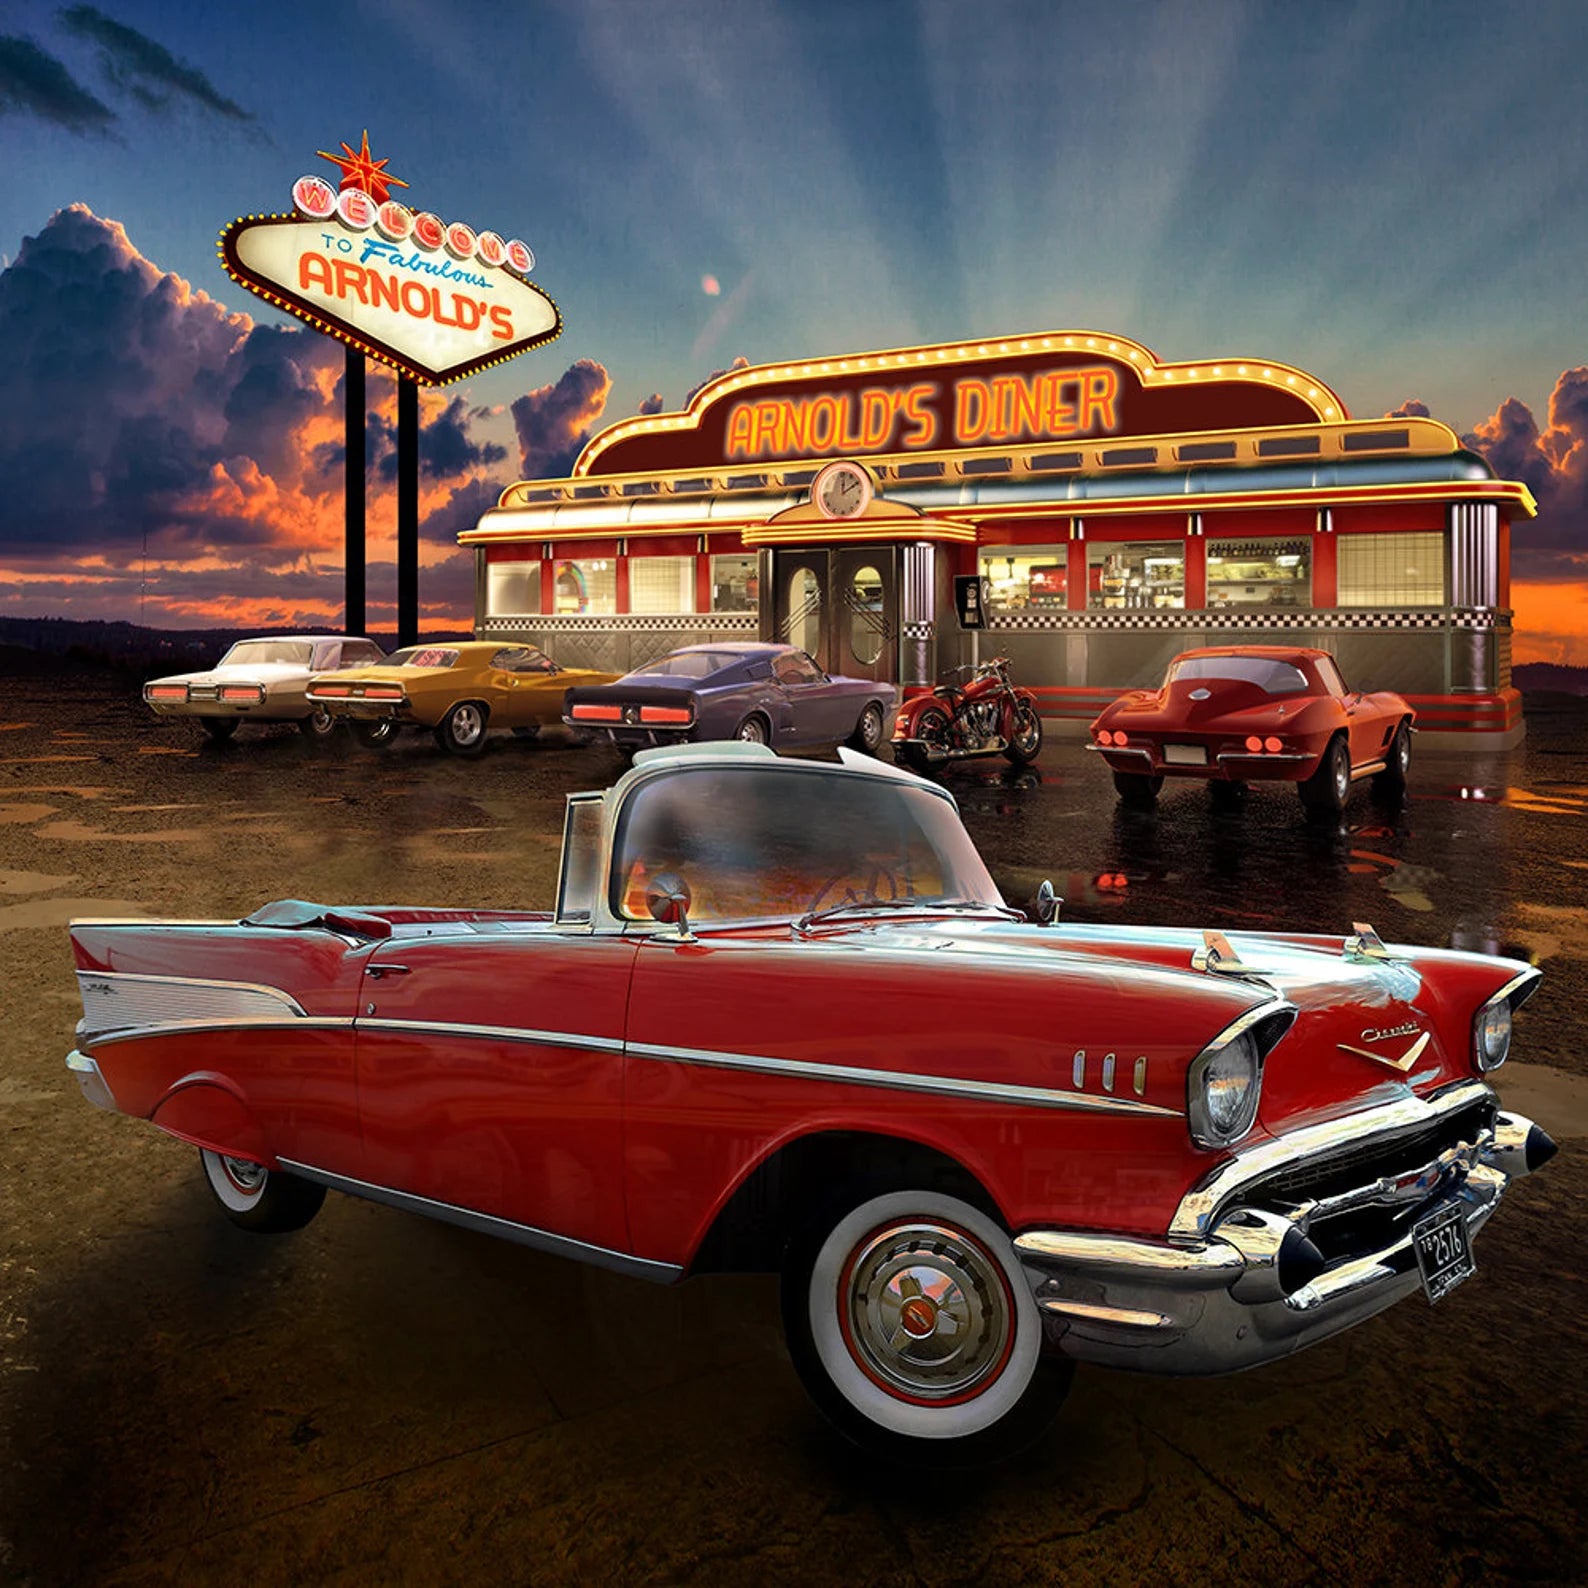 Red 57 Chevy Diner Photo Backdrop - Basic 10  x 8  